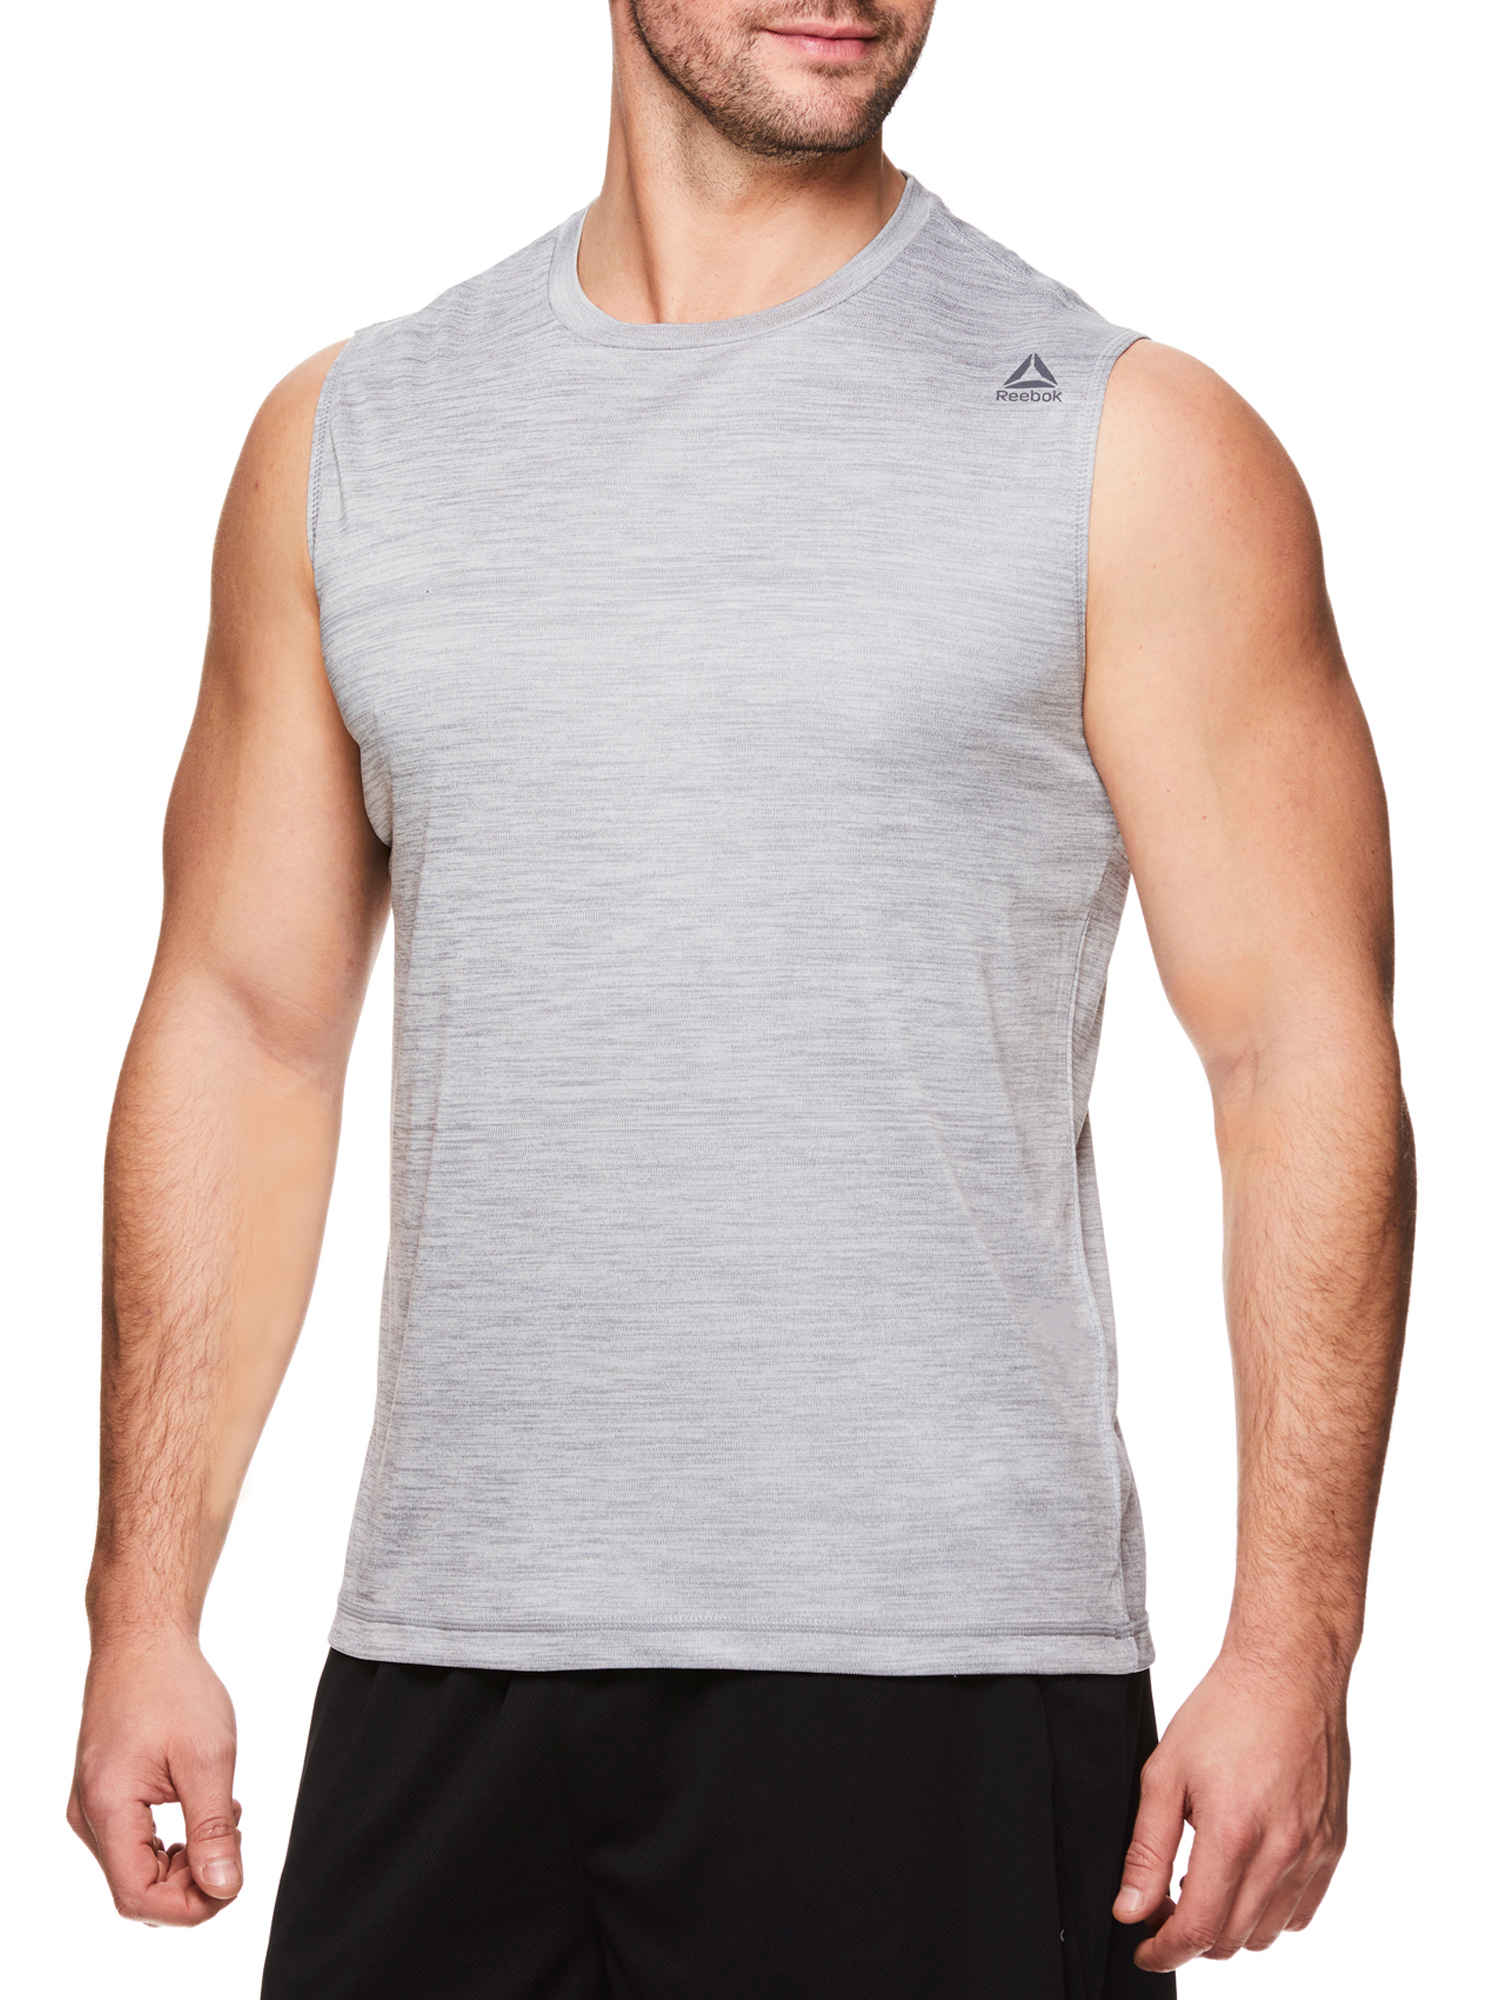 Reebok Men's Charger Muscle Tank Top - image 1 of 4